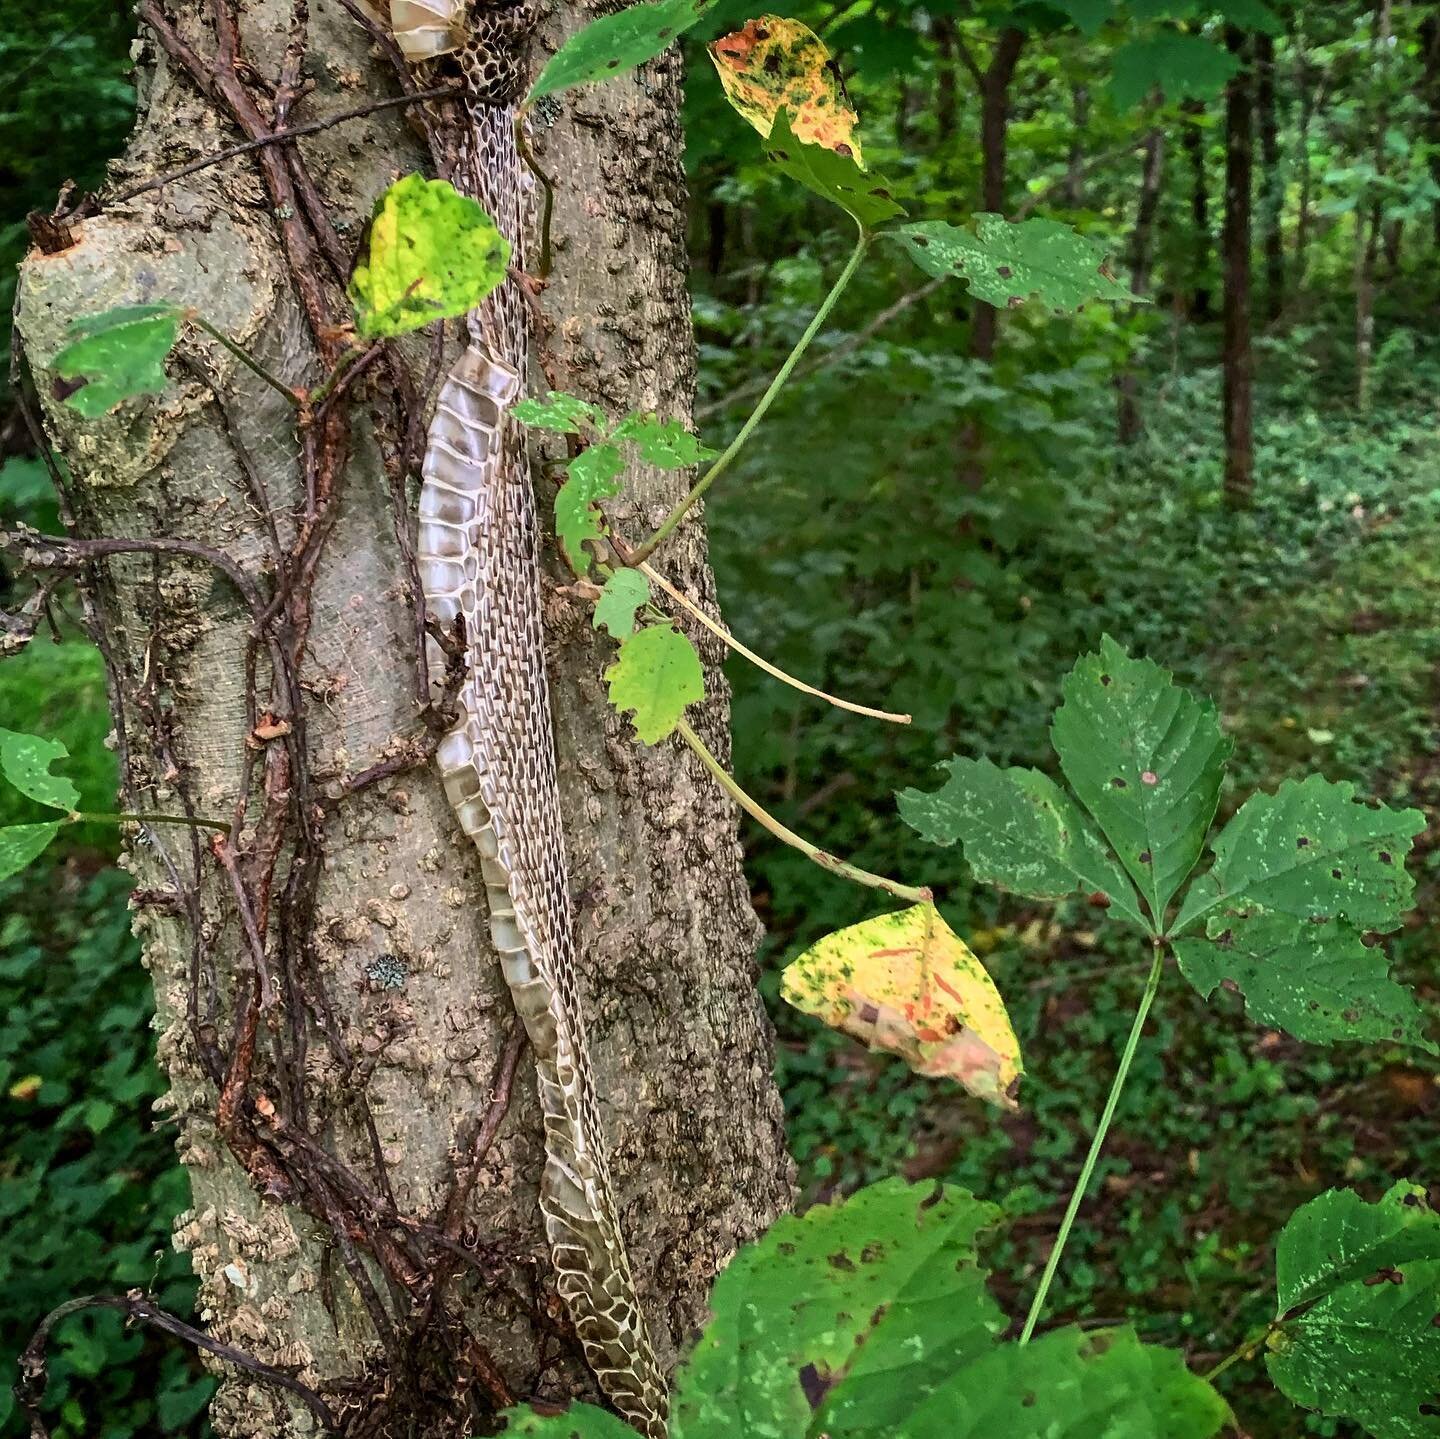 Snakeskin in a tree reminds us to look up while in the woods.
DYK the shed skin stretches as it comes off so it is much larger than the snake that shed it? 
Of course, they shed due to outgrowing their skin, so it&rsquo;s not all comforting news.
.
#